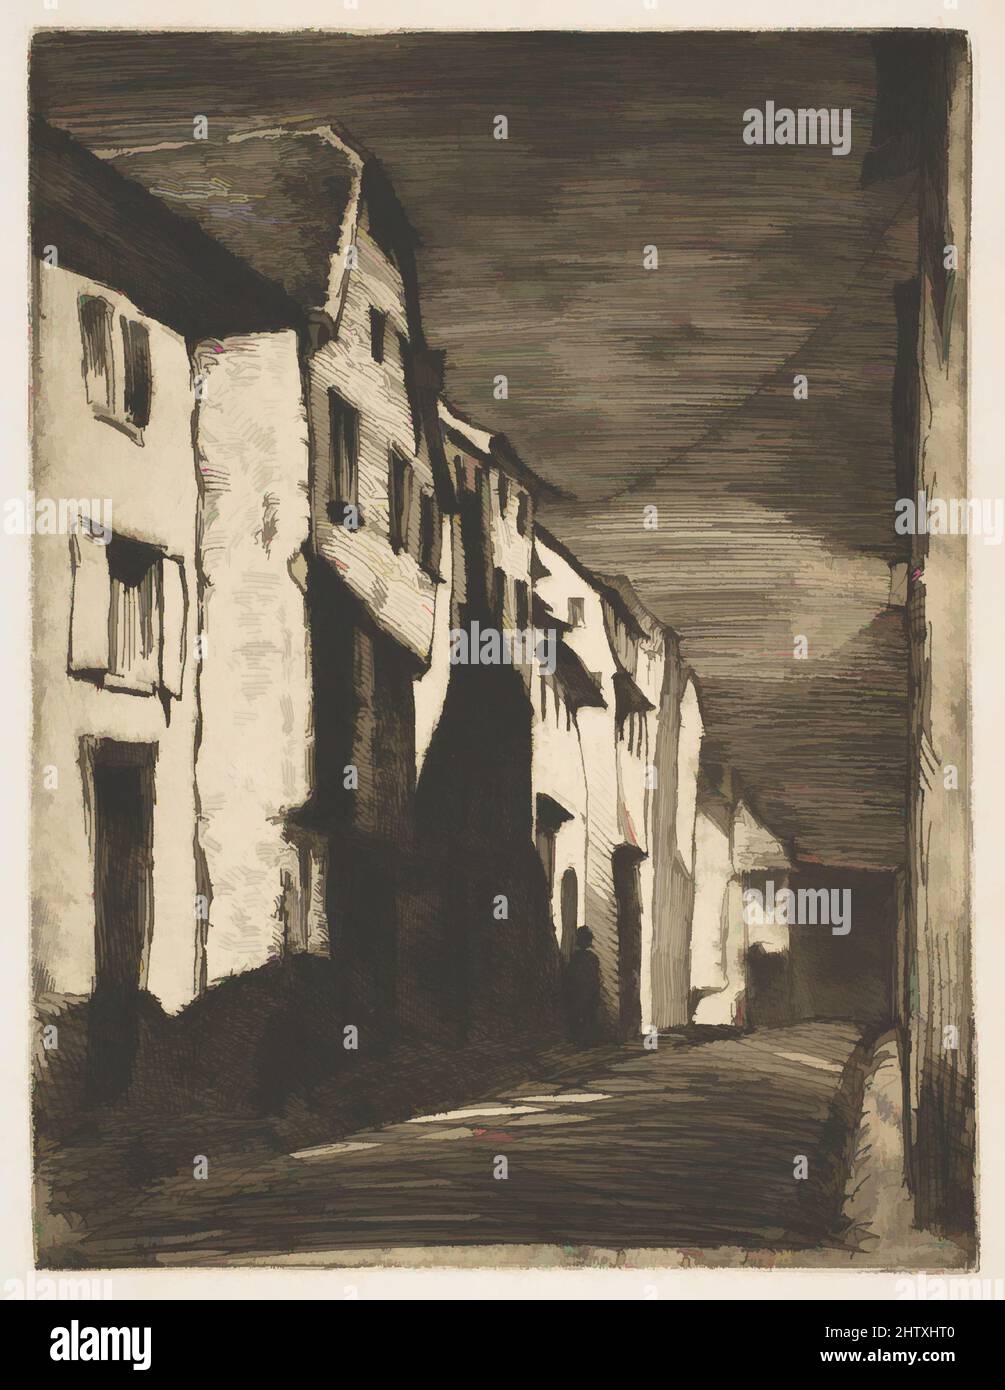 Art inspired by Street at Saverne, 1858, Etching and open bite or sandpaper ground; third state of four (Glasgow); printed in black ink on ivory chine on off-white wove paper (chine collé), Plate: 8 3/16 x 6 1/4 in. (20.8 x 15.8 cm), Prints, James McNeill Whistler (American, Lowell, Classic works modernized by Artotop with a splash of modernity. Shapes, color and value, eye-catching visual impact on art. Emotions through freedom of artworks in a contemporary way. A timeless message pursuing a wildly creative new direction. Artists turning to the digital medium and creating the Artotop NFT Stock Photo